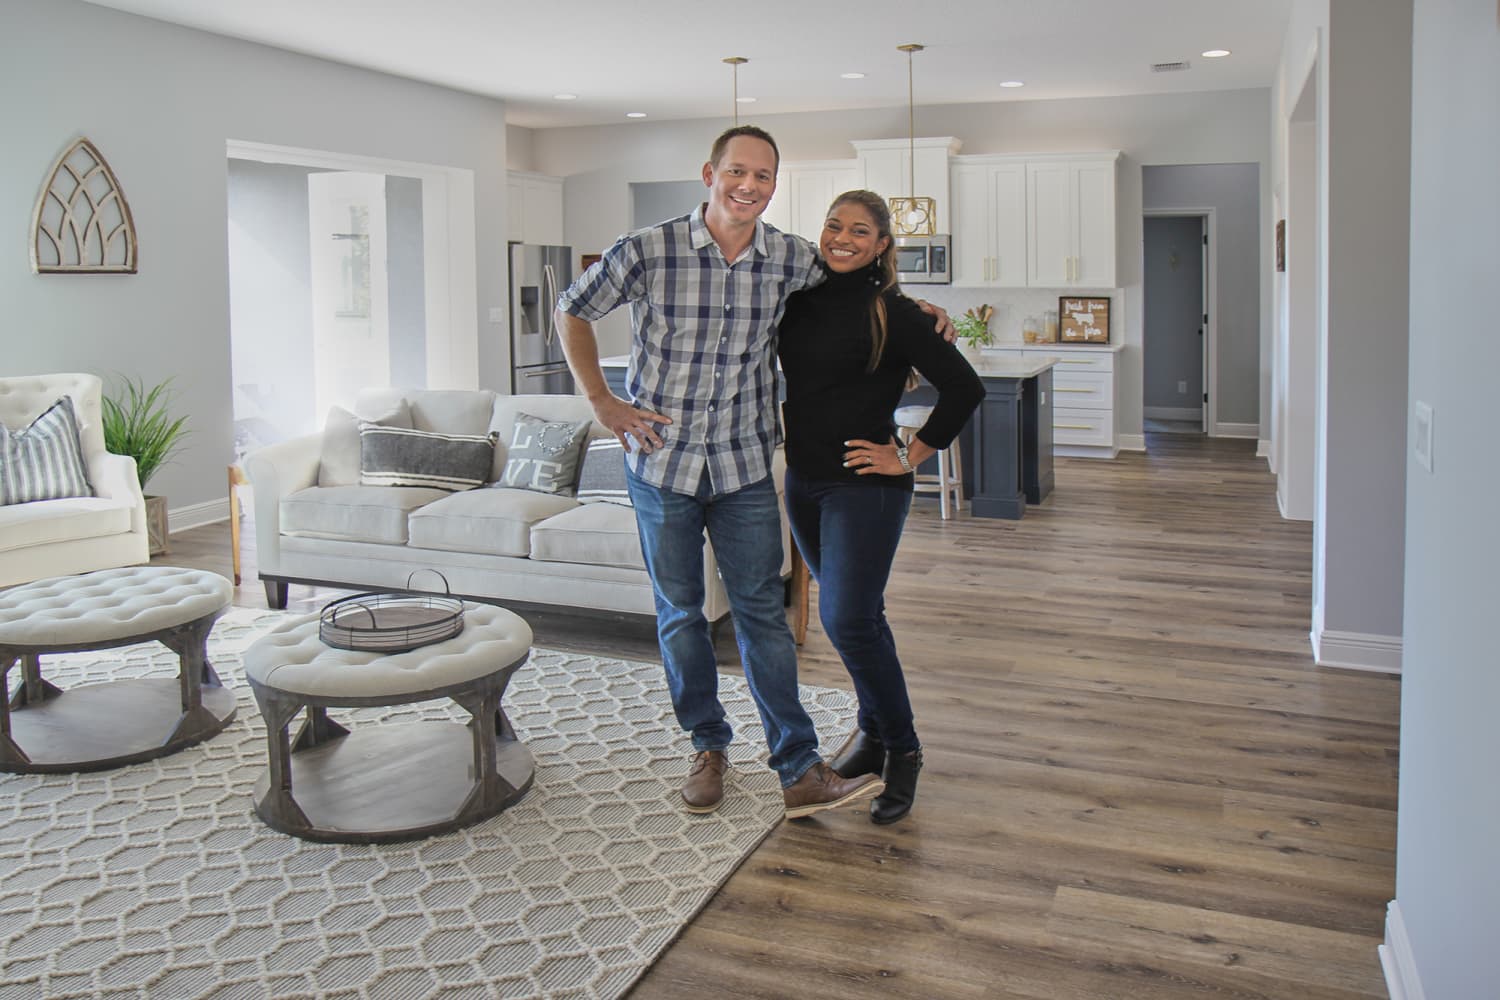 This New HGTV Show Challenges People to Build a Dream Home in Just 100 Days...